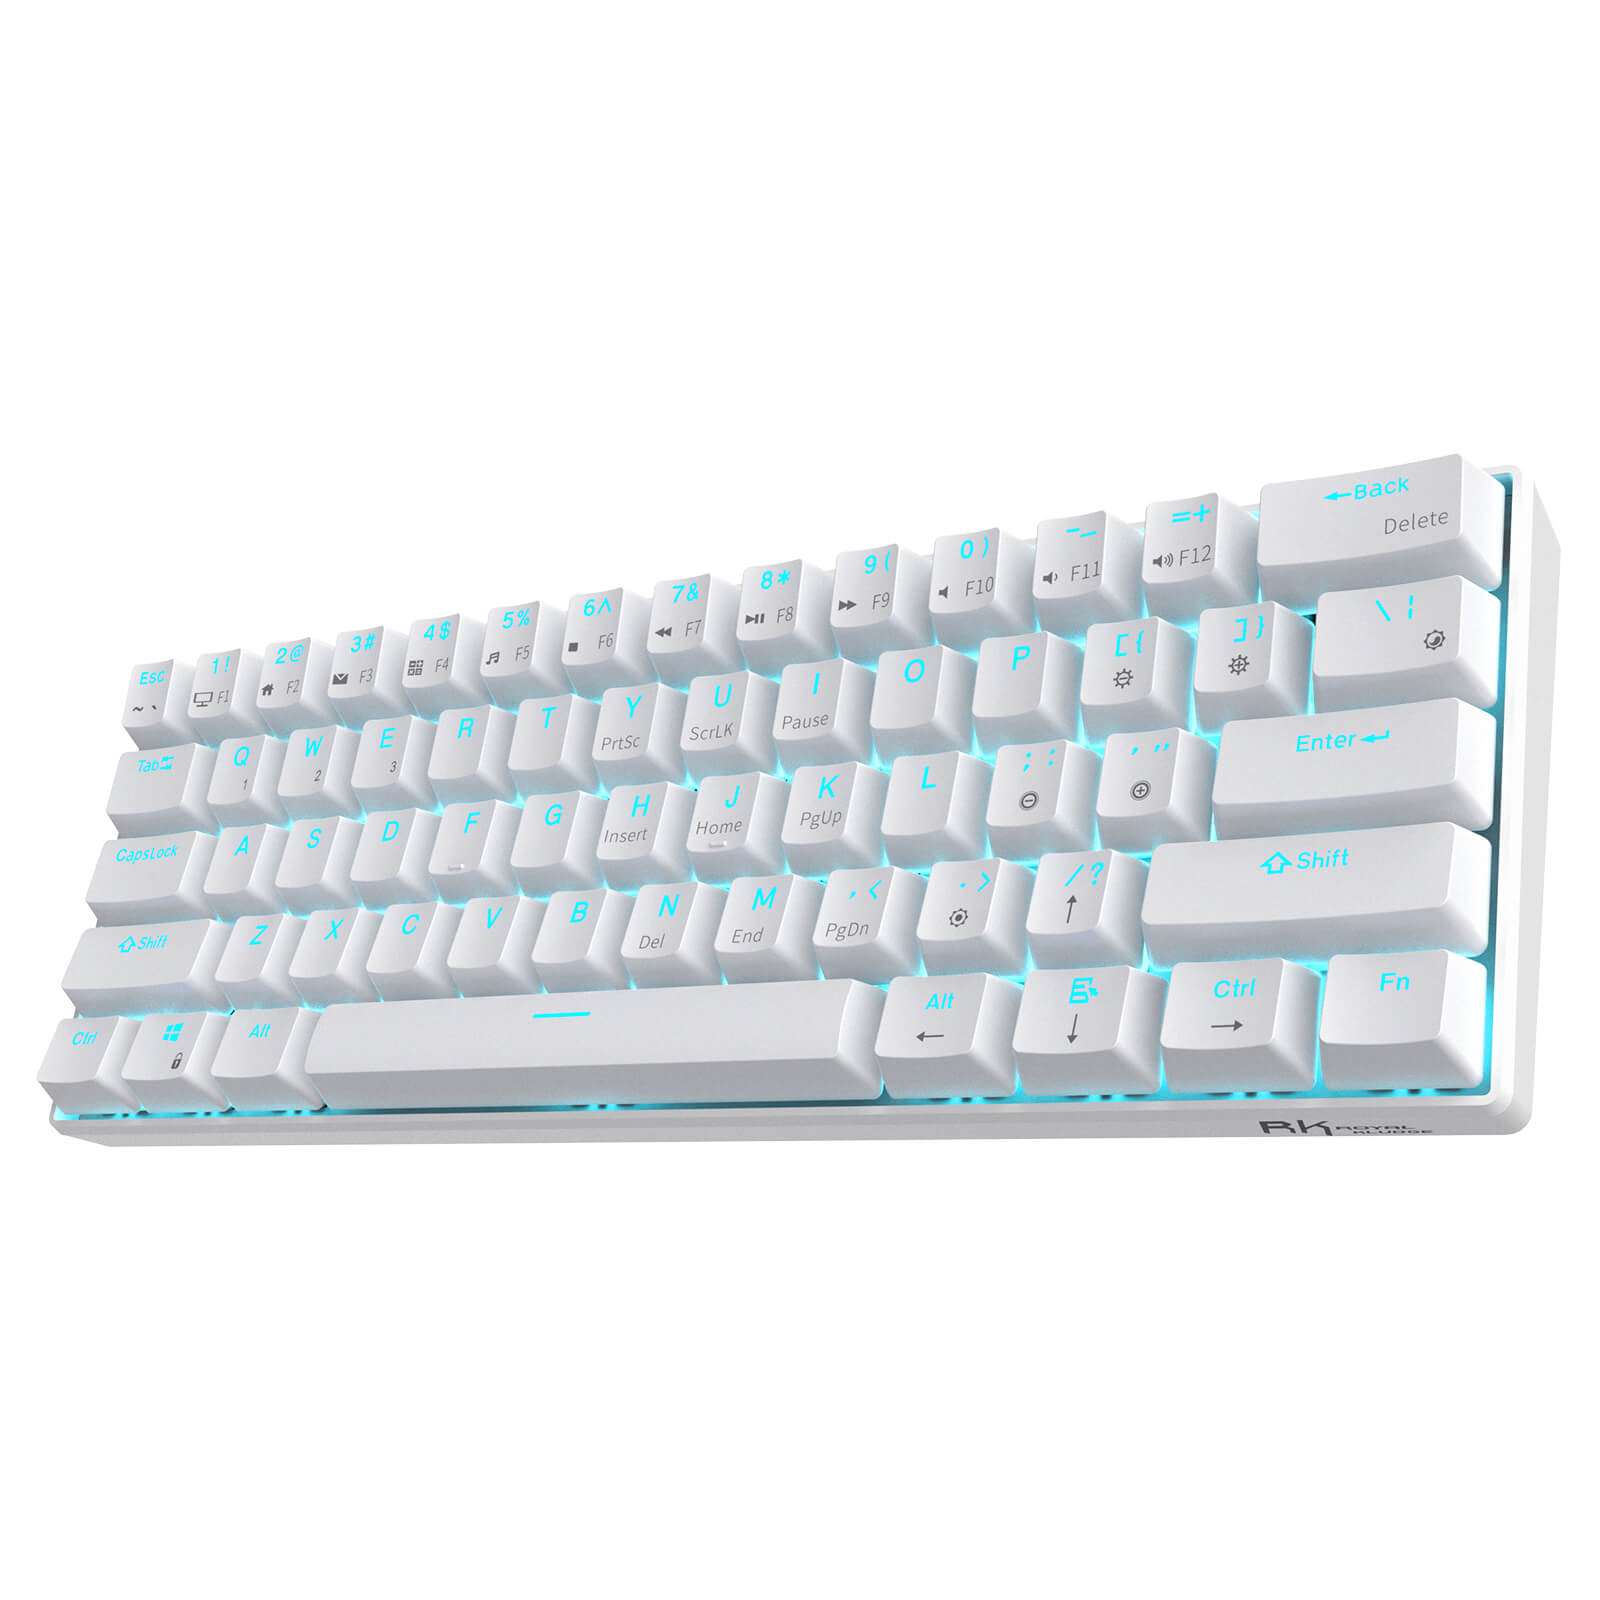 Looking for a wireless mechanical gaming keyboard that will provide the ultimate gaming experience? Look no further than the RK61 by ROYAL KLUDGE. With its compact 60% design and sleek white color, this keyboard will look great on any desk. Check out the image now and see for yourself!